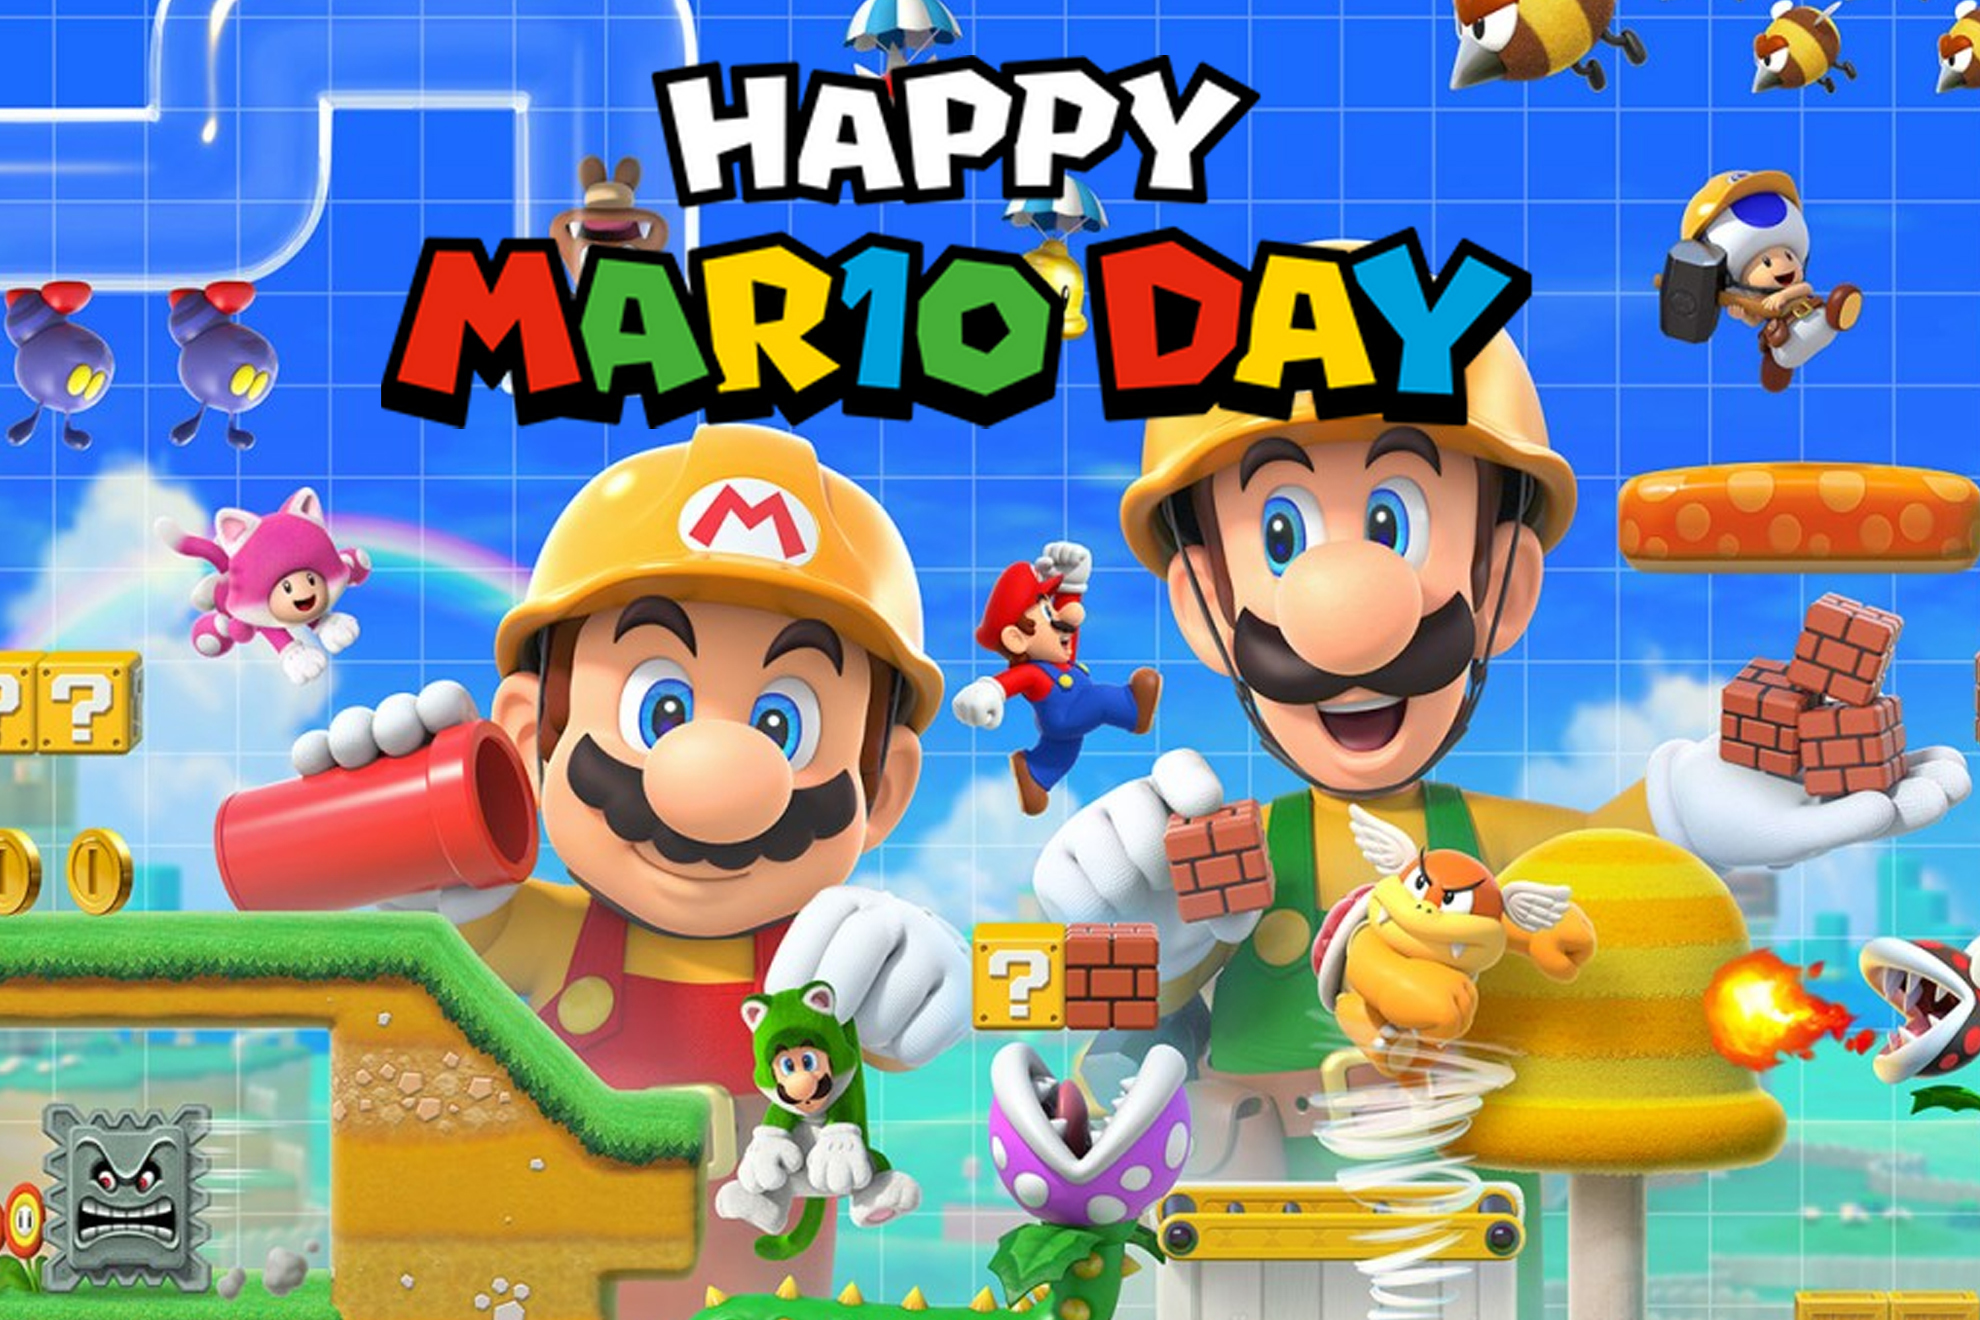 MAR10 DAY, what is the origin of Mario Day and why is it celebrated on March 10?